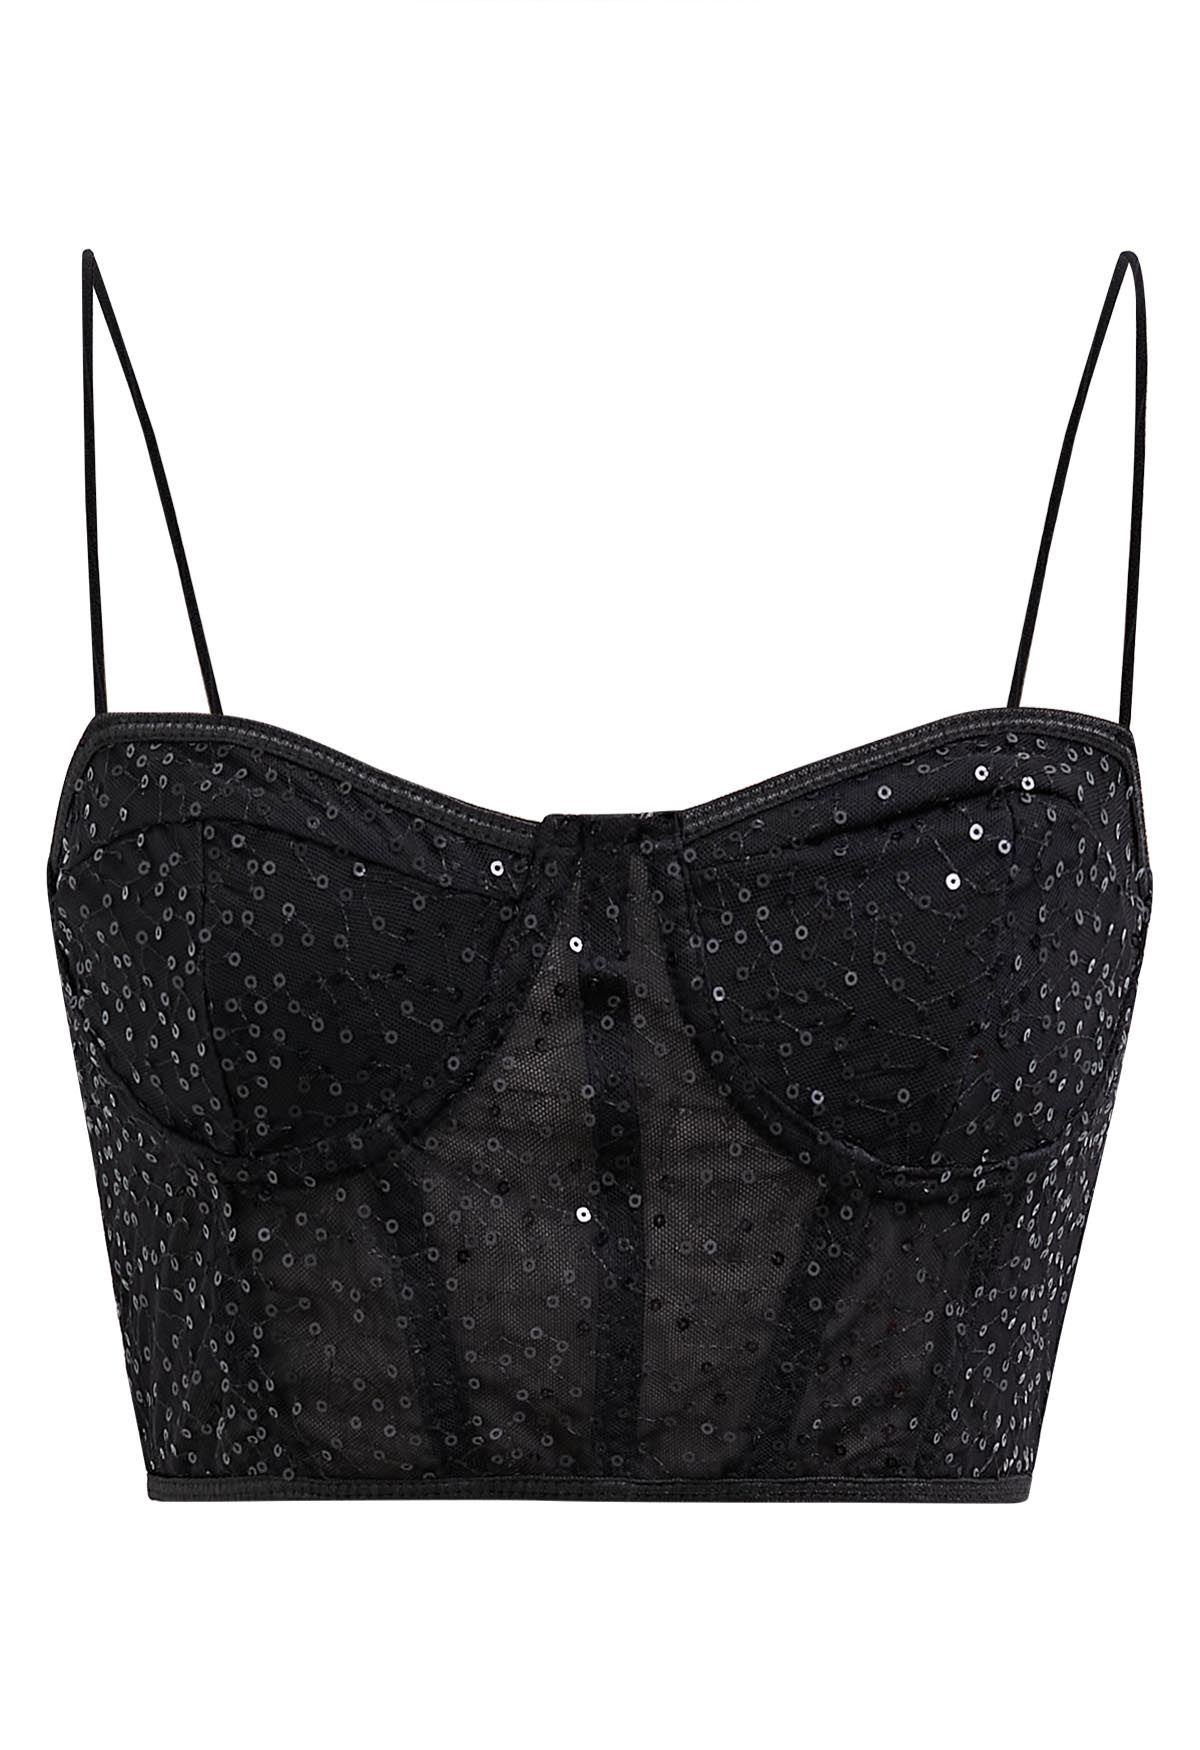 Sequin Embroidered Corset Bustier Top in Black - Retro, Indie and